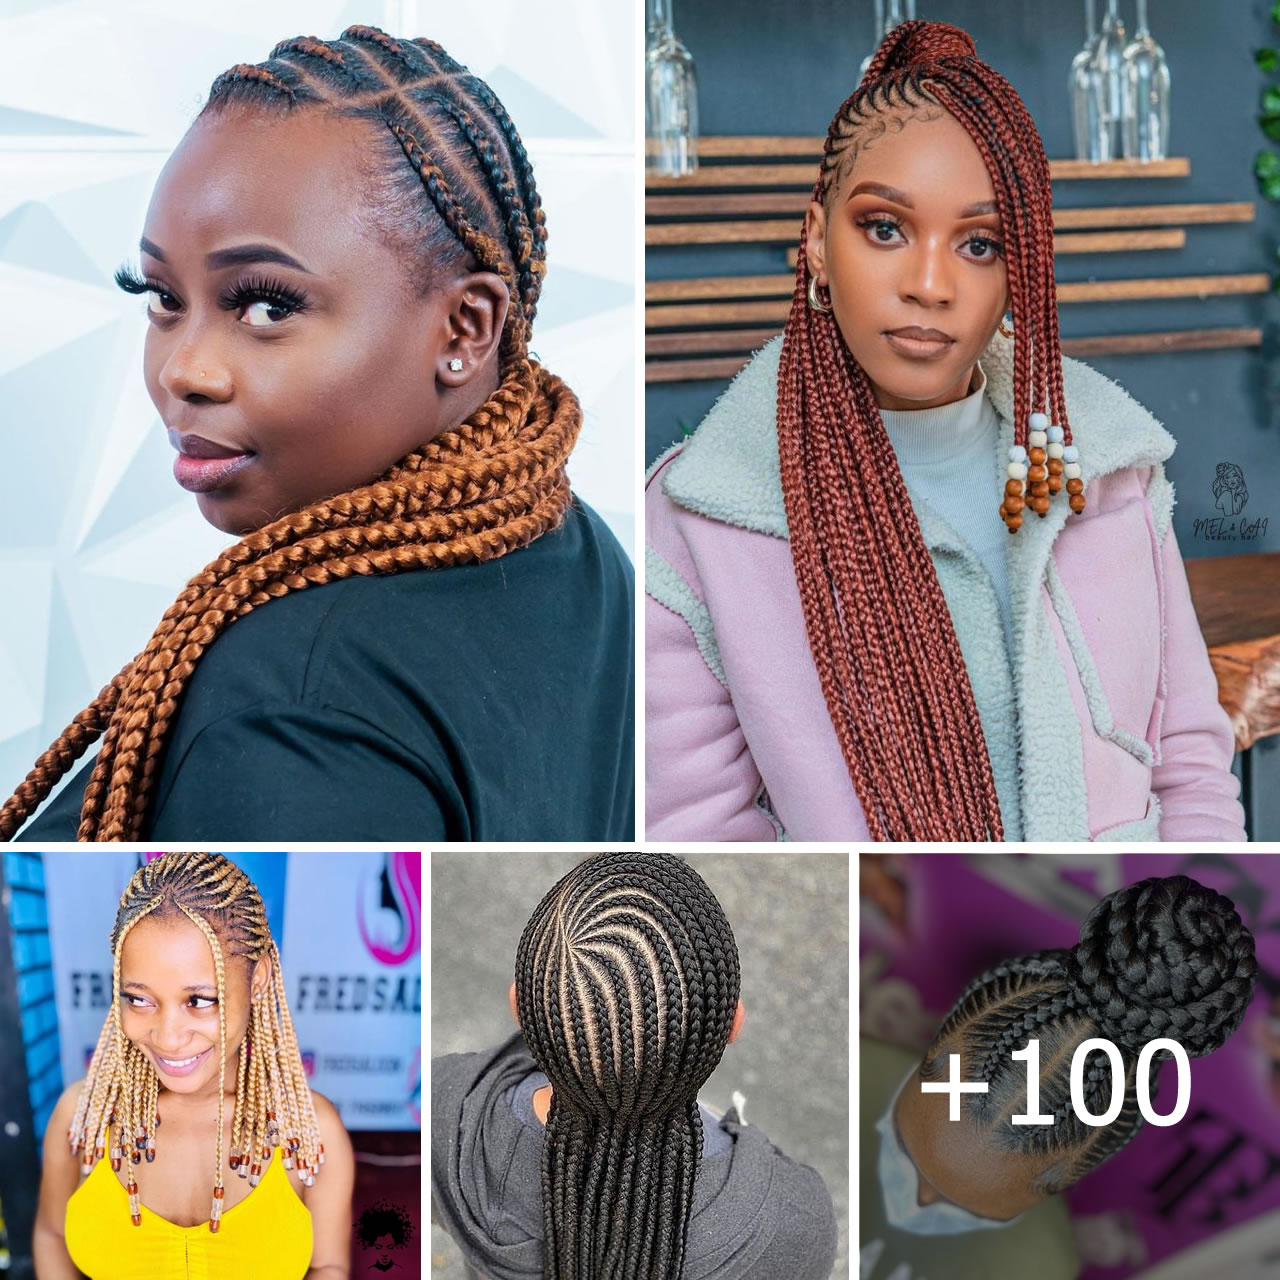 100 Different Braiding Styles Exploring the World of Braids 1 1